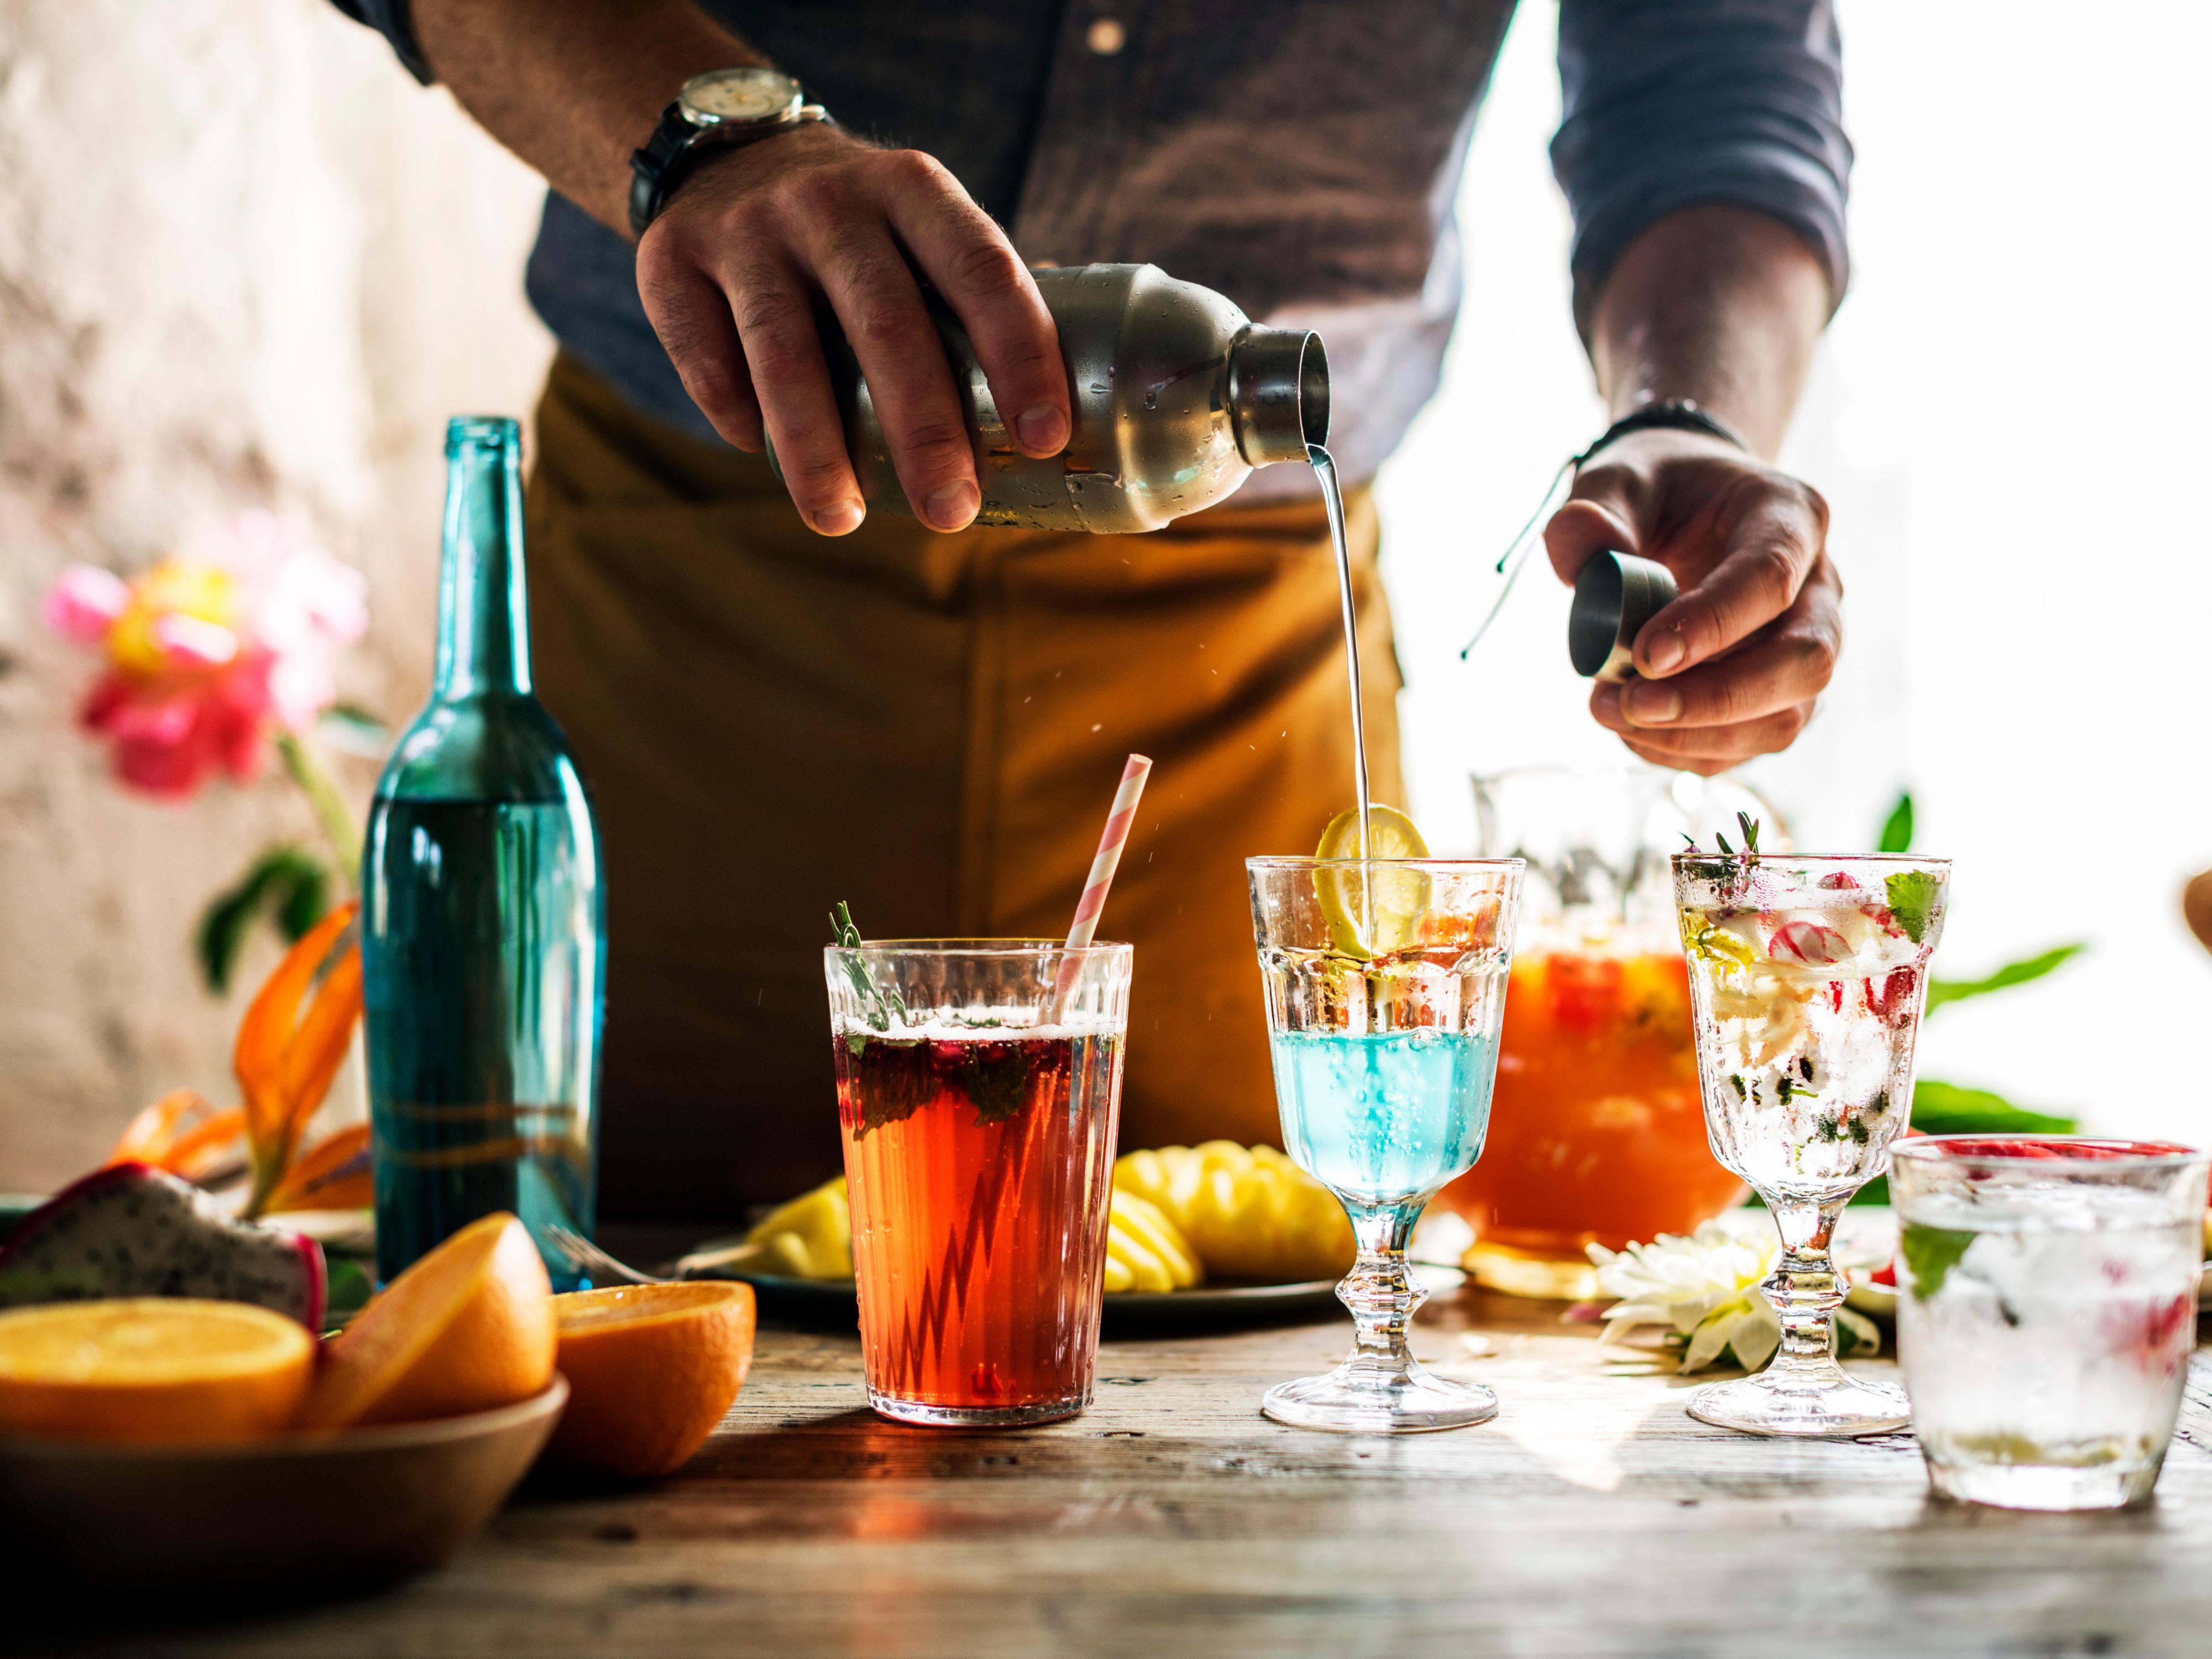 Mixology & Cooking Classes